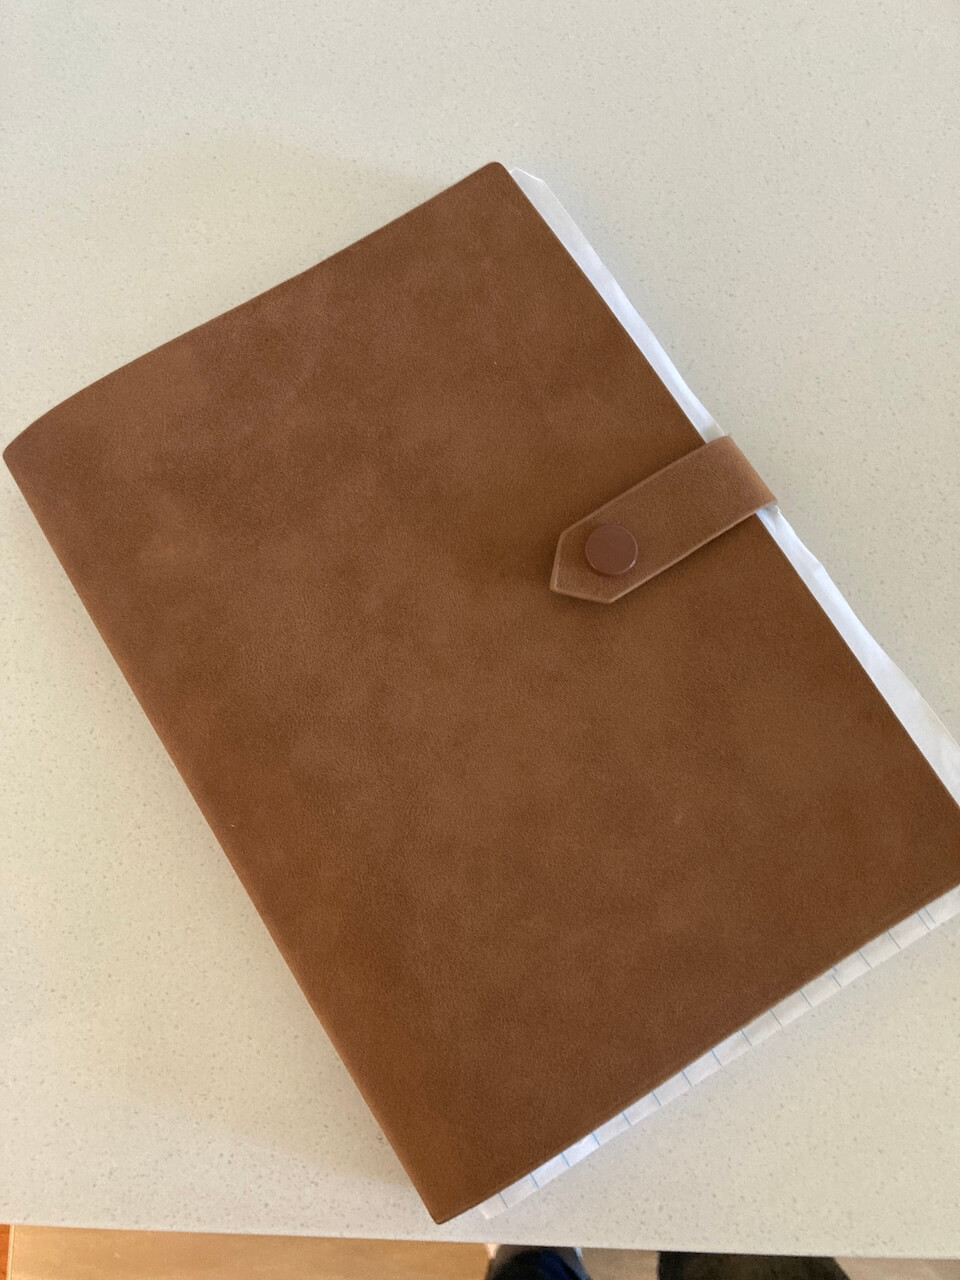 share some Friday favourites - notebook